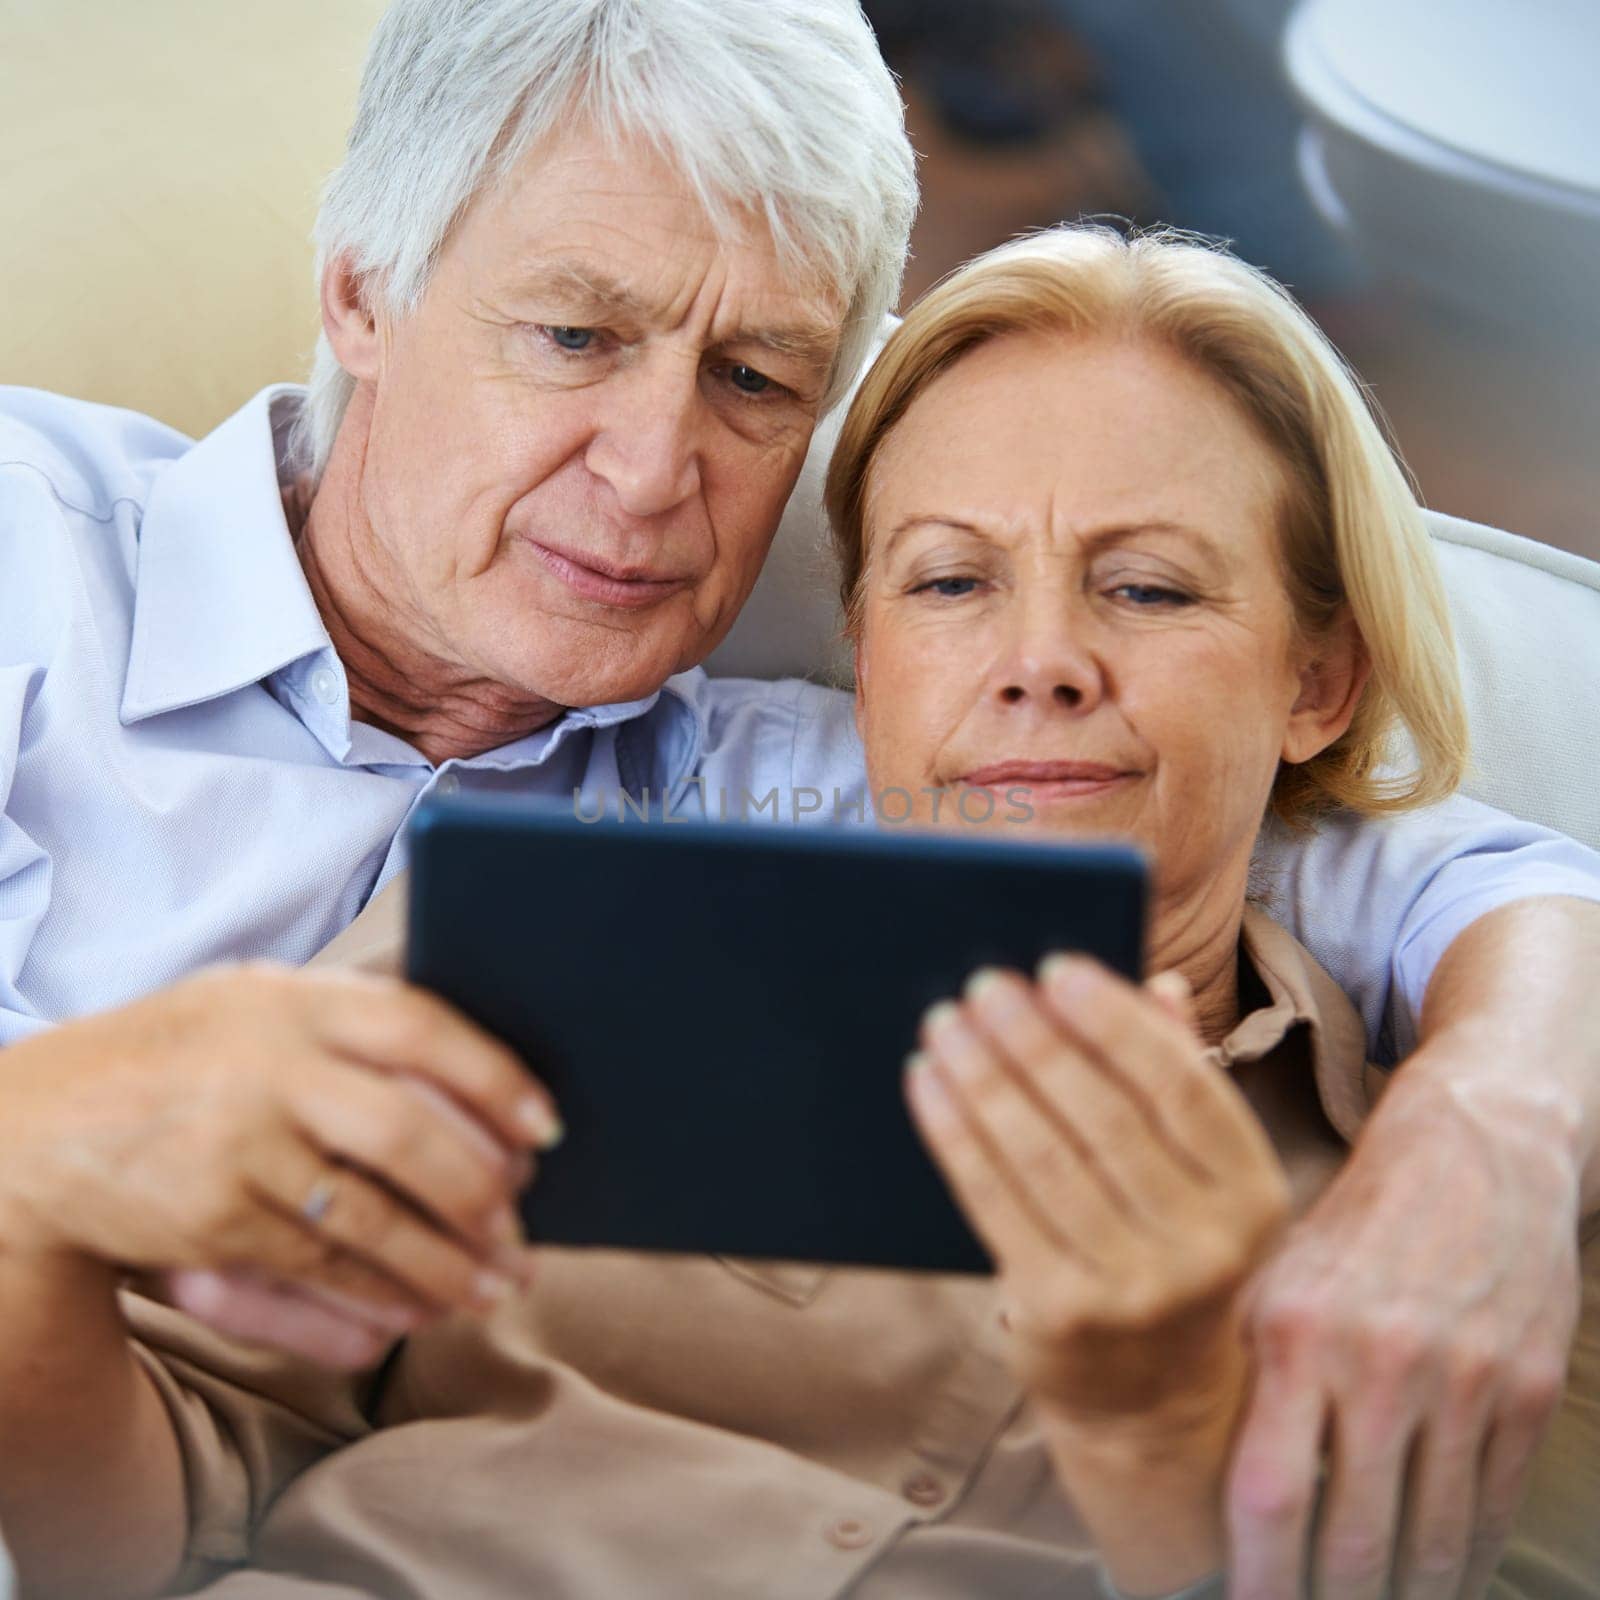 Making the cozy connection. a happy elderly couple watching something on a digital tablet while relaxing on their sofa. by YuriArcurs